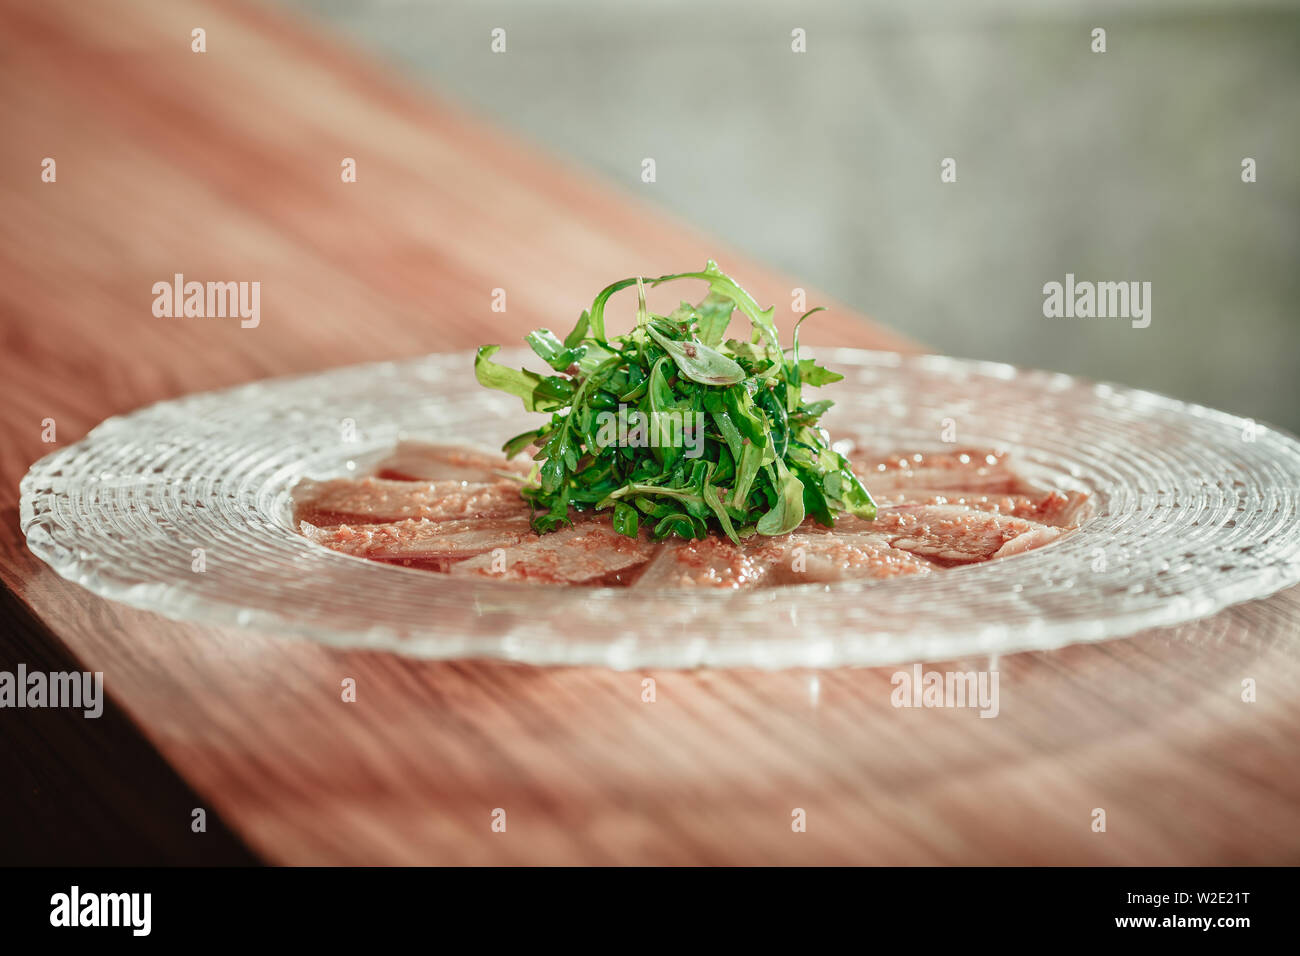 Delicious appetizer with herbs on glass plate on wooden table Stock Photo